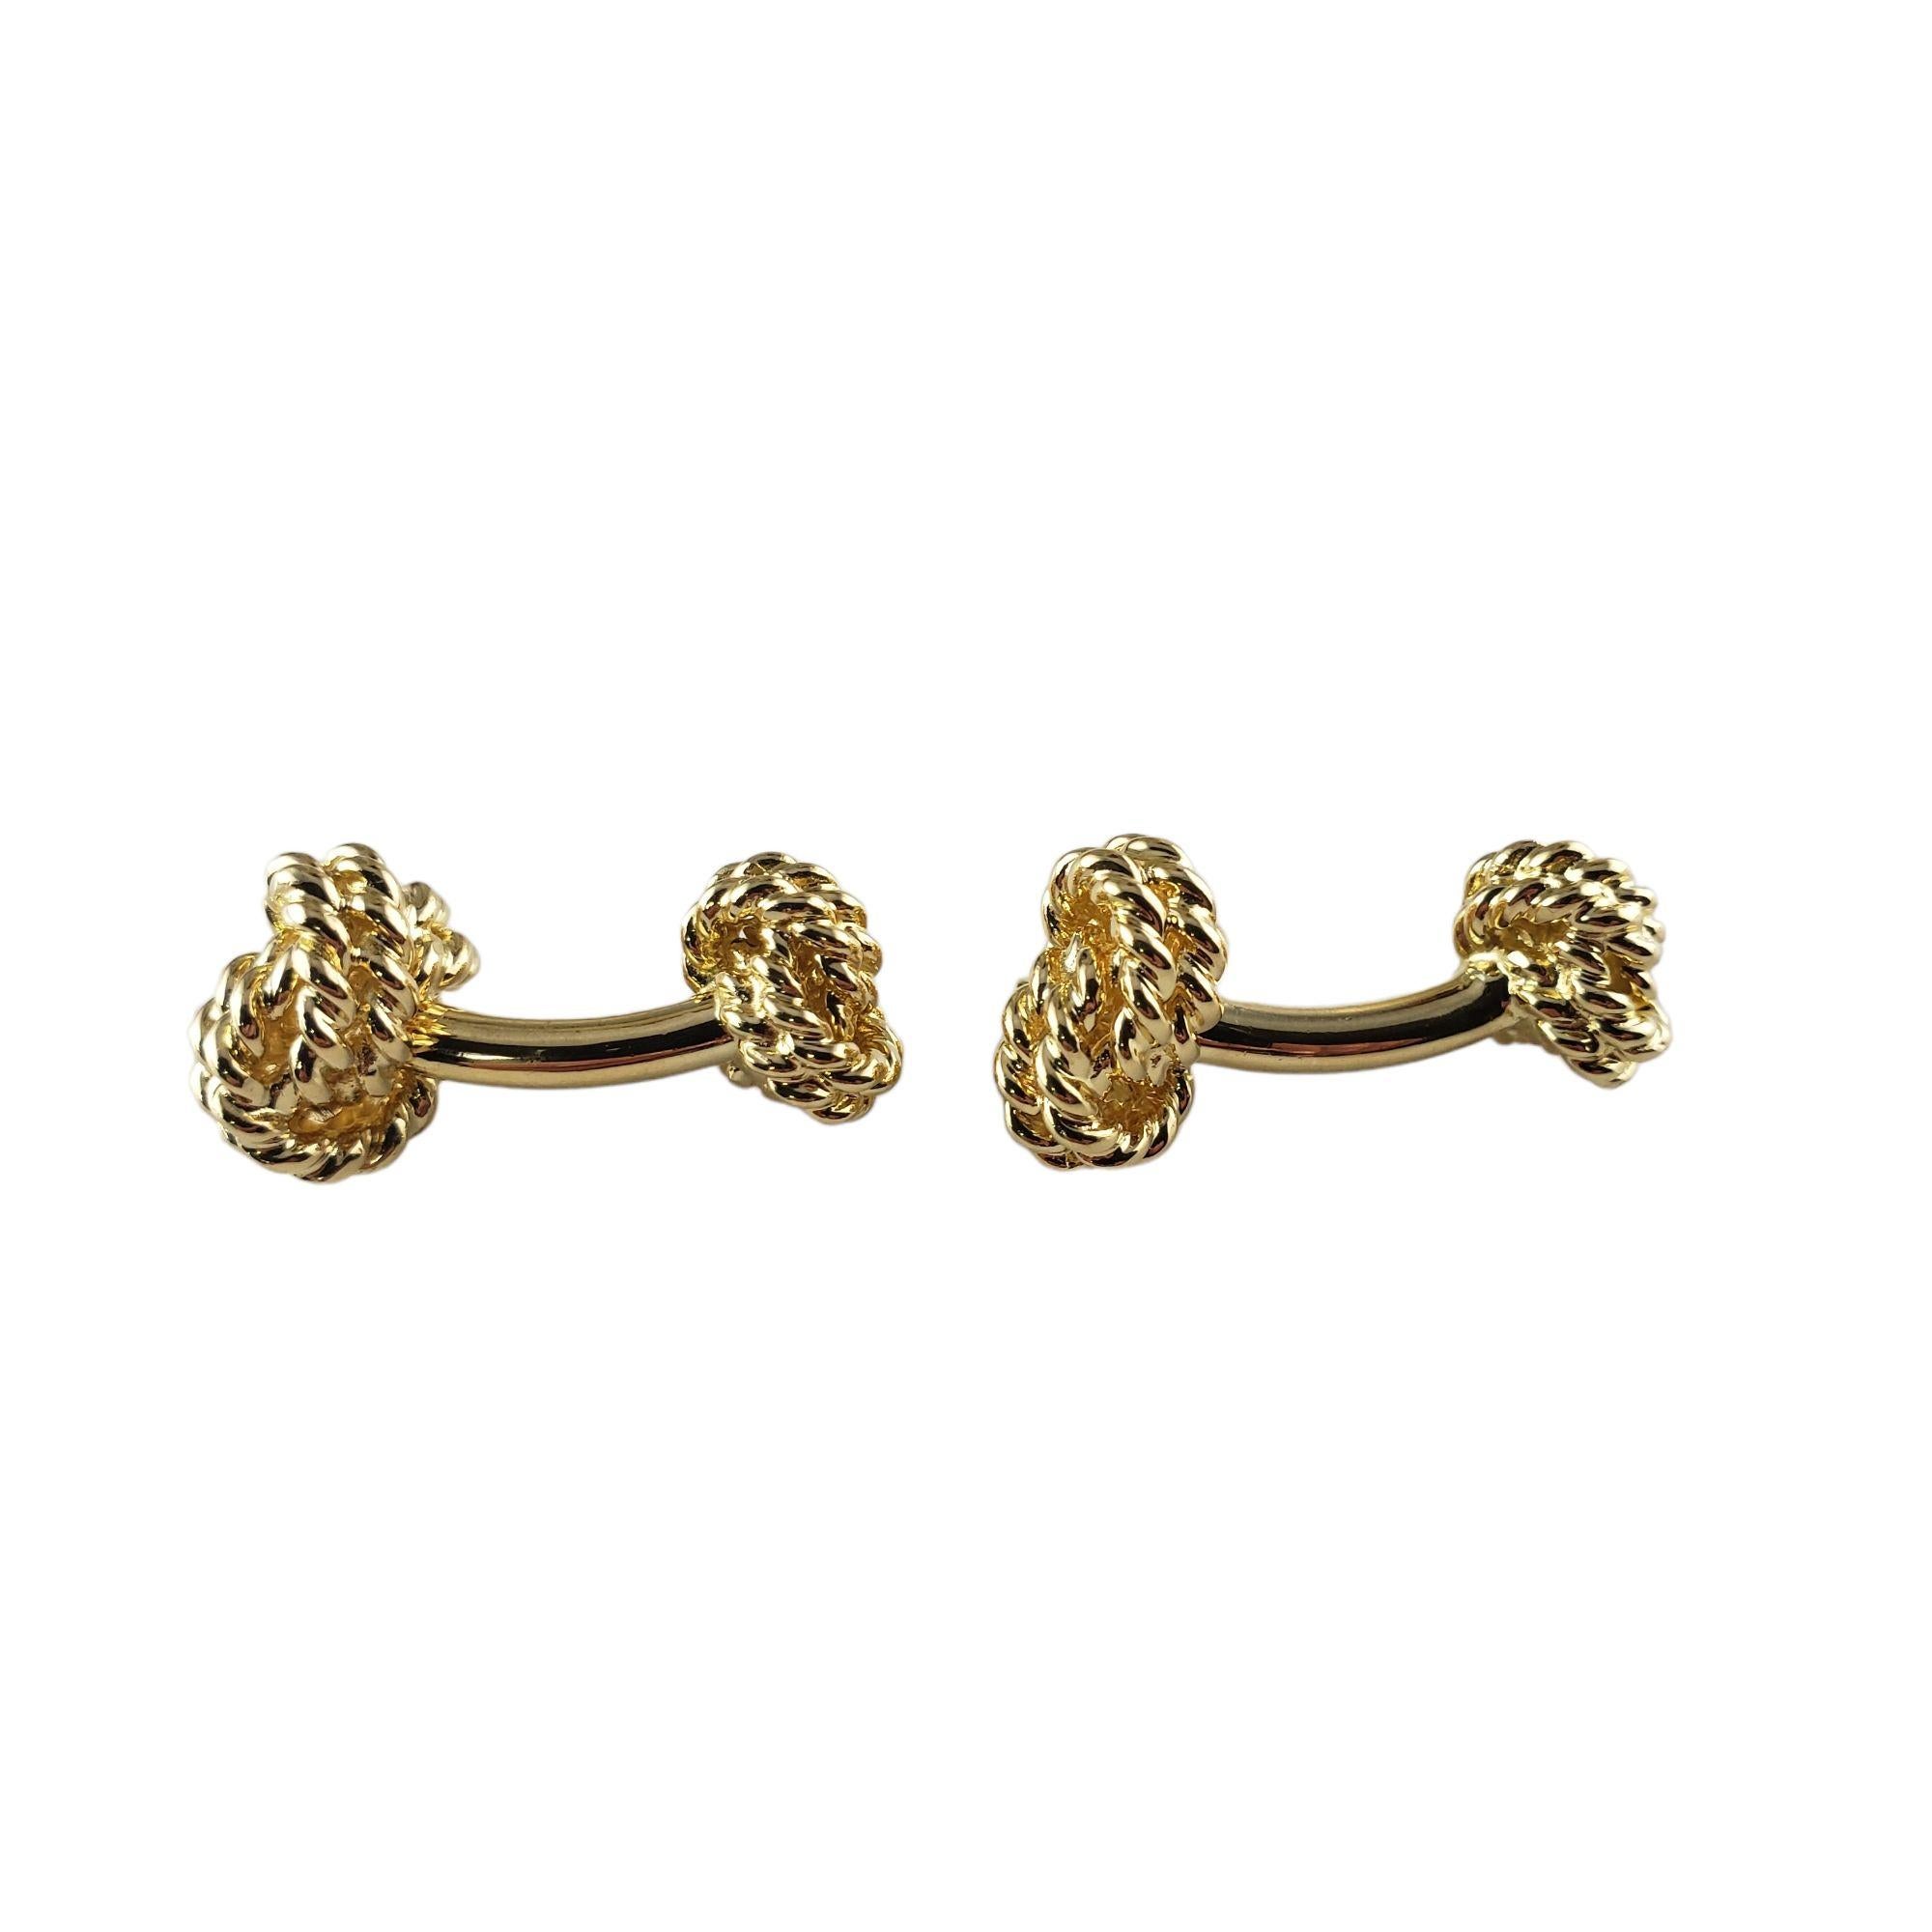 Vintage Tiffany & Co. 18 Karat Yellow Gold Knot Cufflinks-

These elegant knot cufflinks by Tiffany & Co. are crafted in meticulously detailed 18K yellow gold.

Size: 13 mm x 21 mm

Weight: 19.1 gr./ 12.2 dwt.

Stamped: Tiffany & Co. 750

Very good